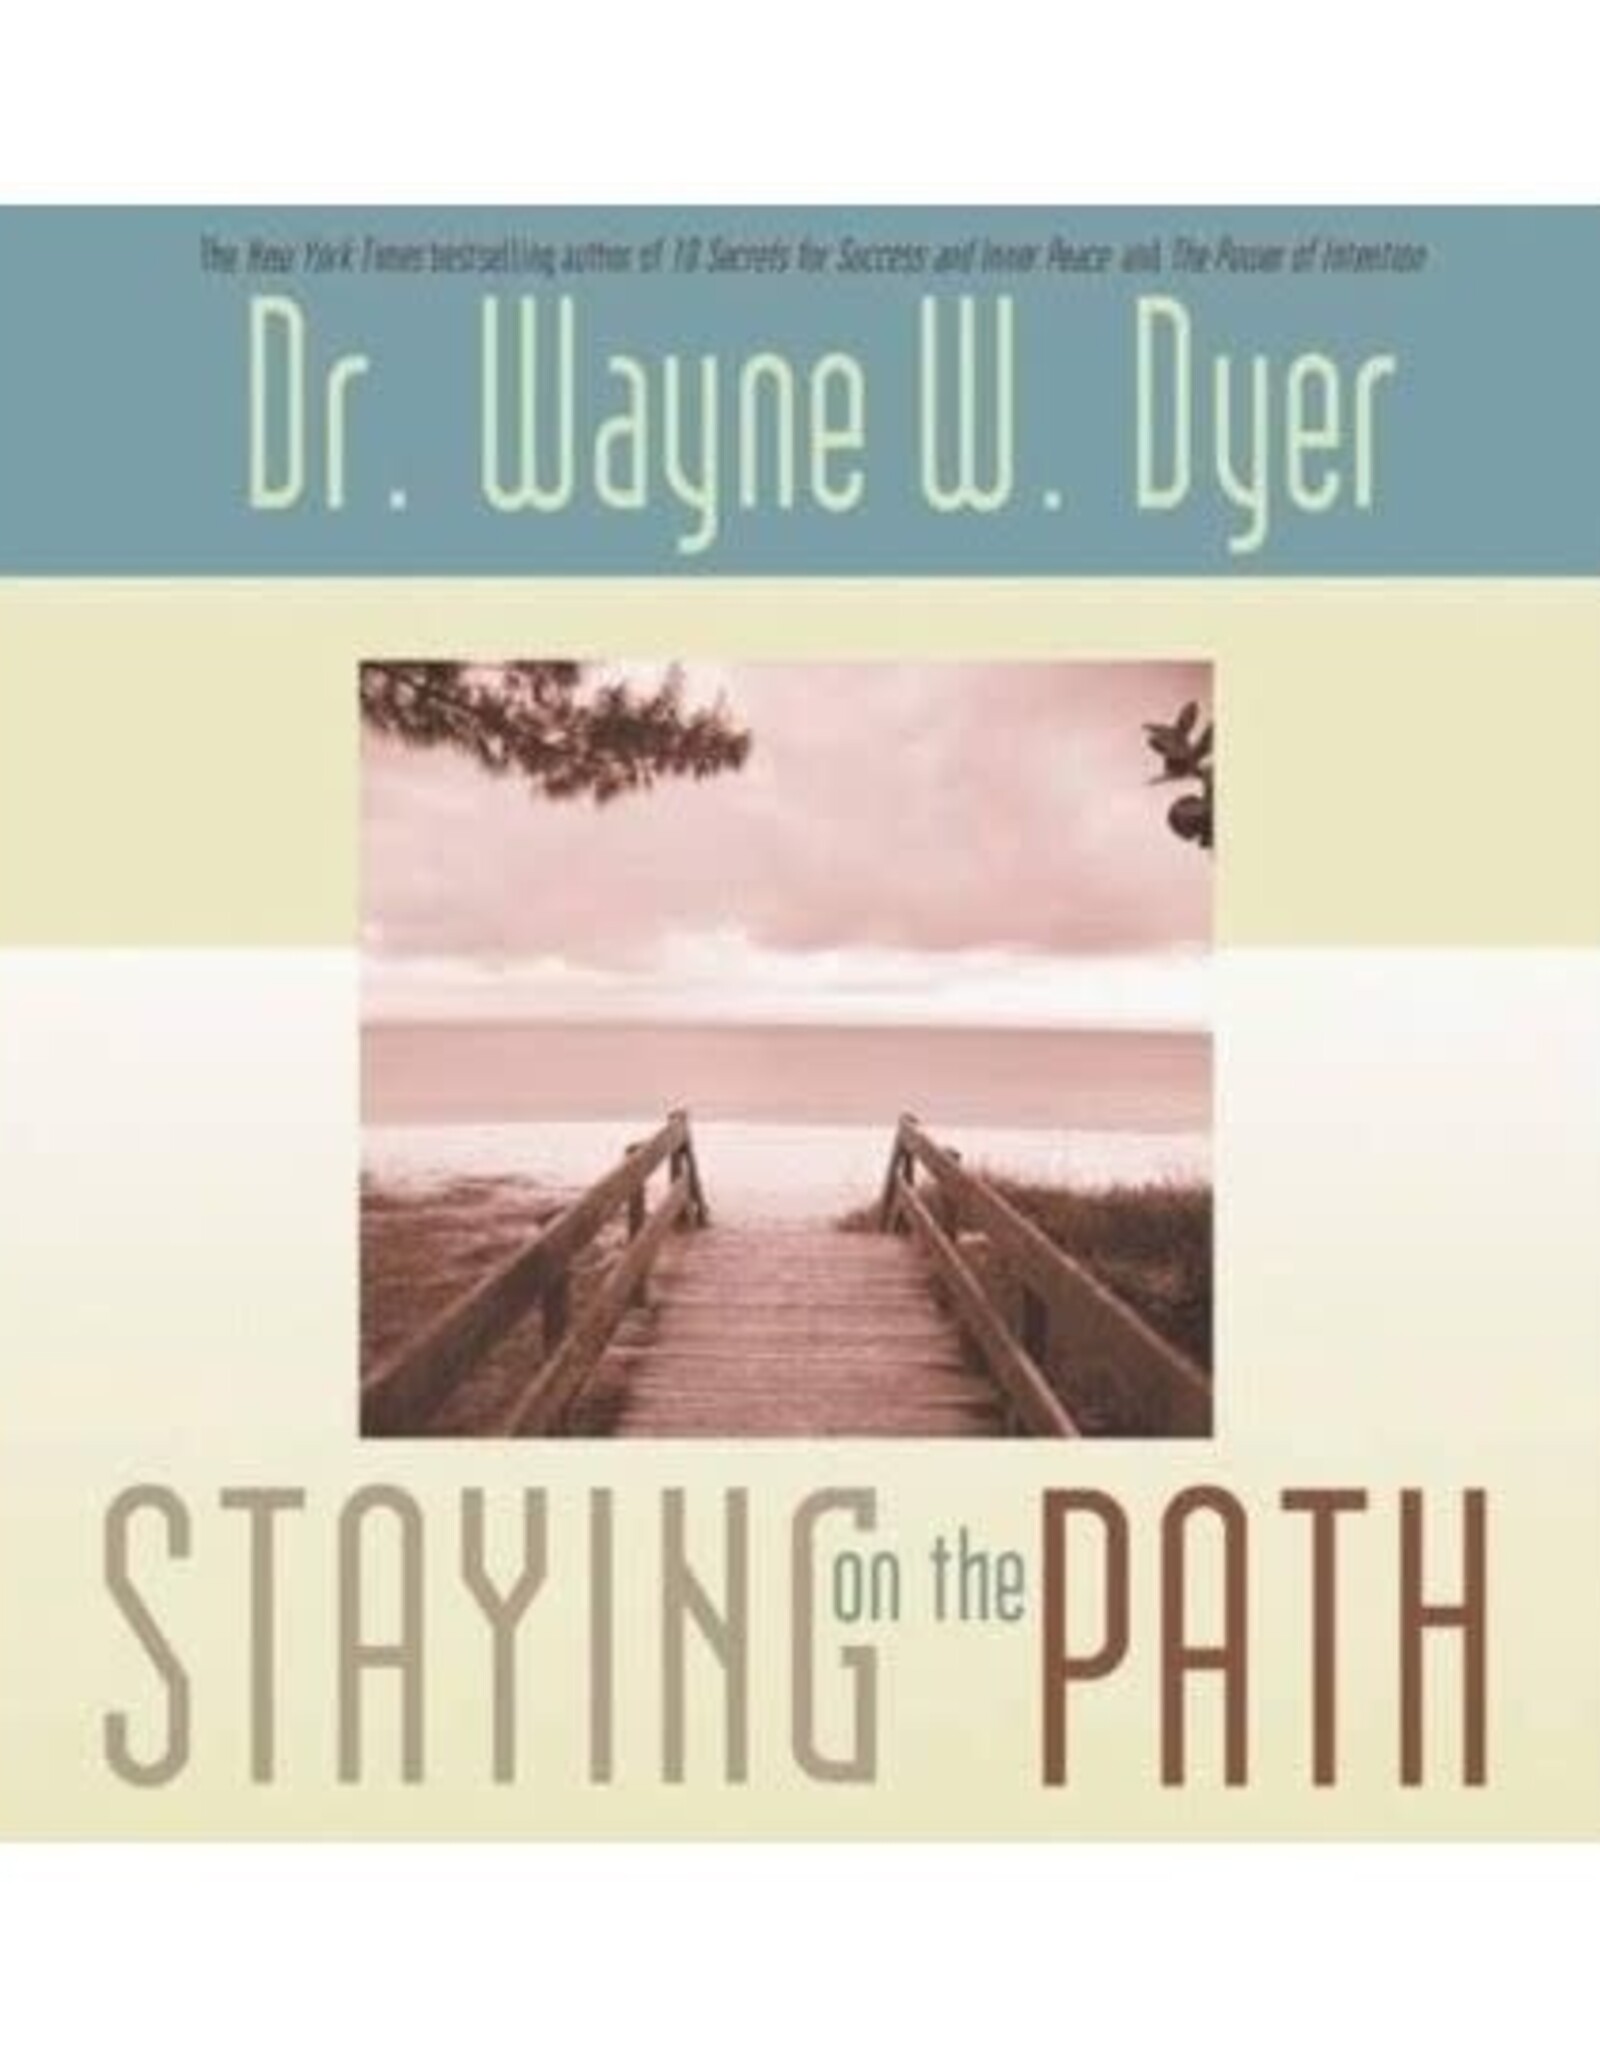 Staying on the Path by Dr. Wayne W. Dyer